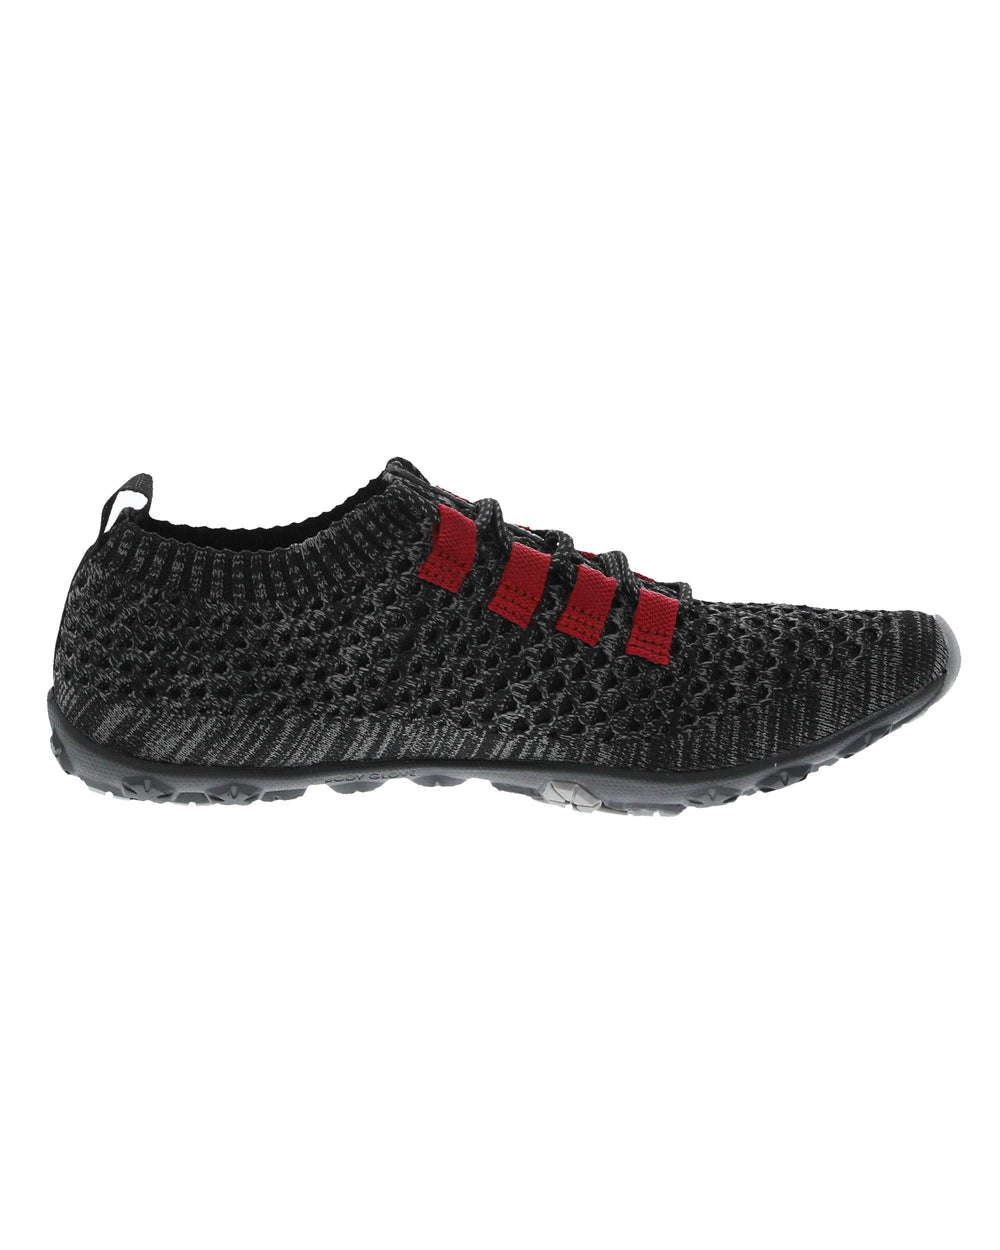 Men's Tracker Water Shoes - Black/Red